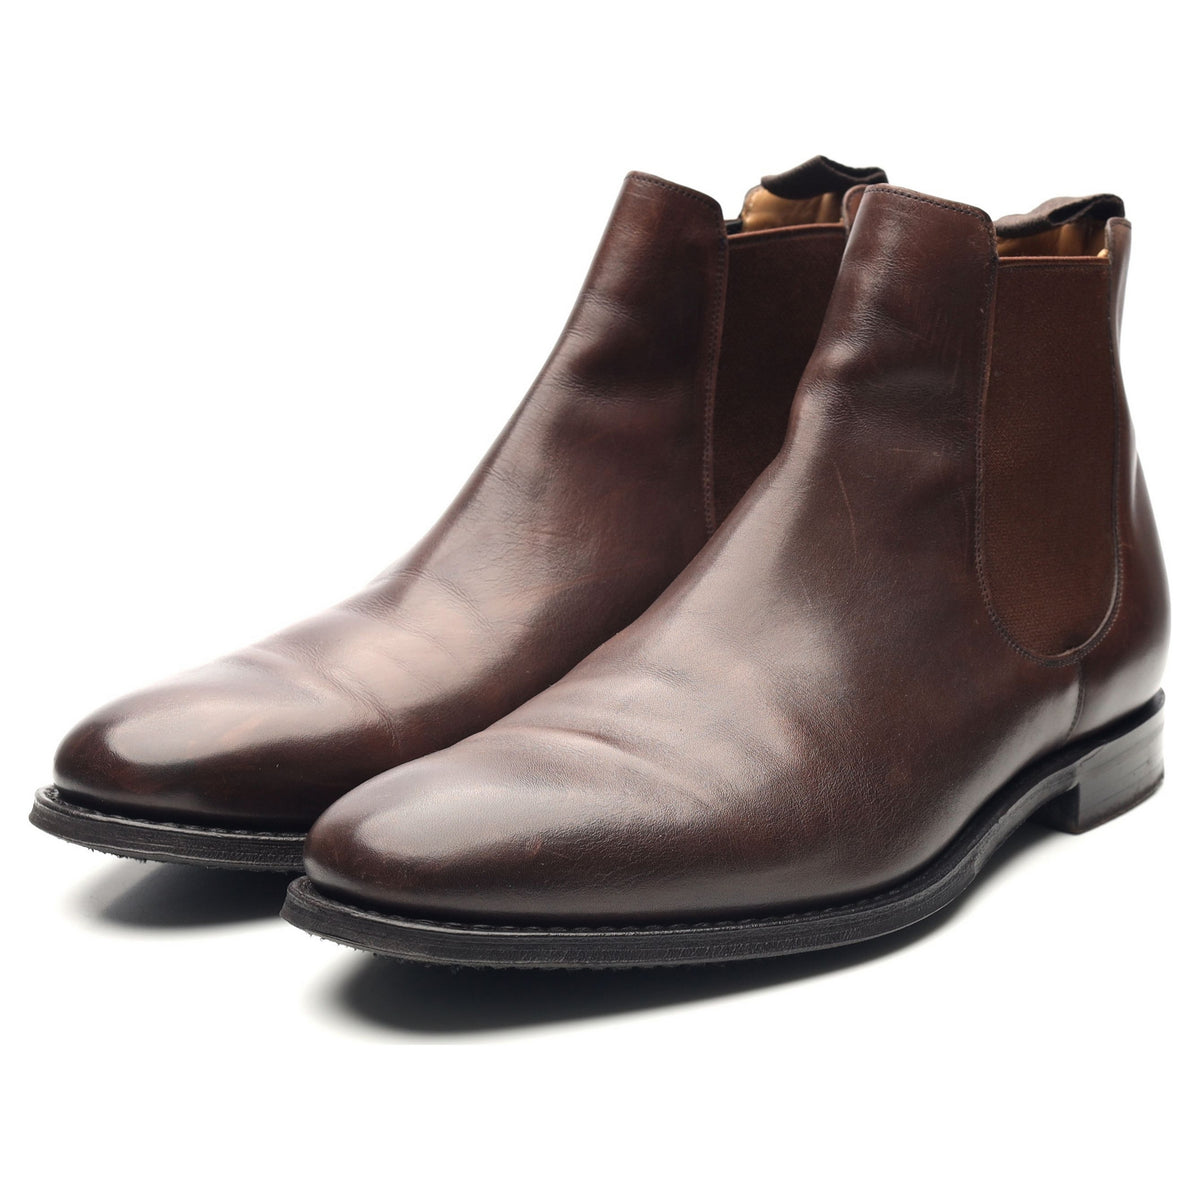 Amberley 2' Dark Brown Leather Boots UK 8.5 F - Abbot's Shoes